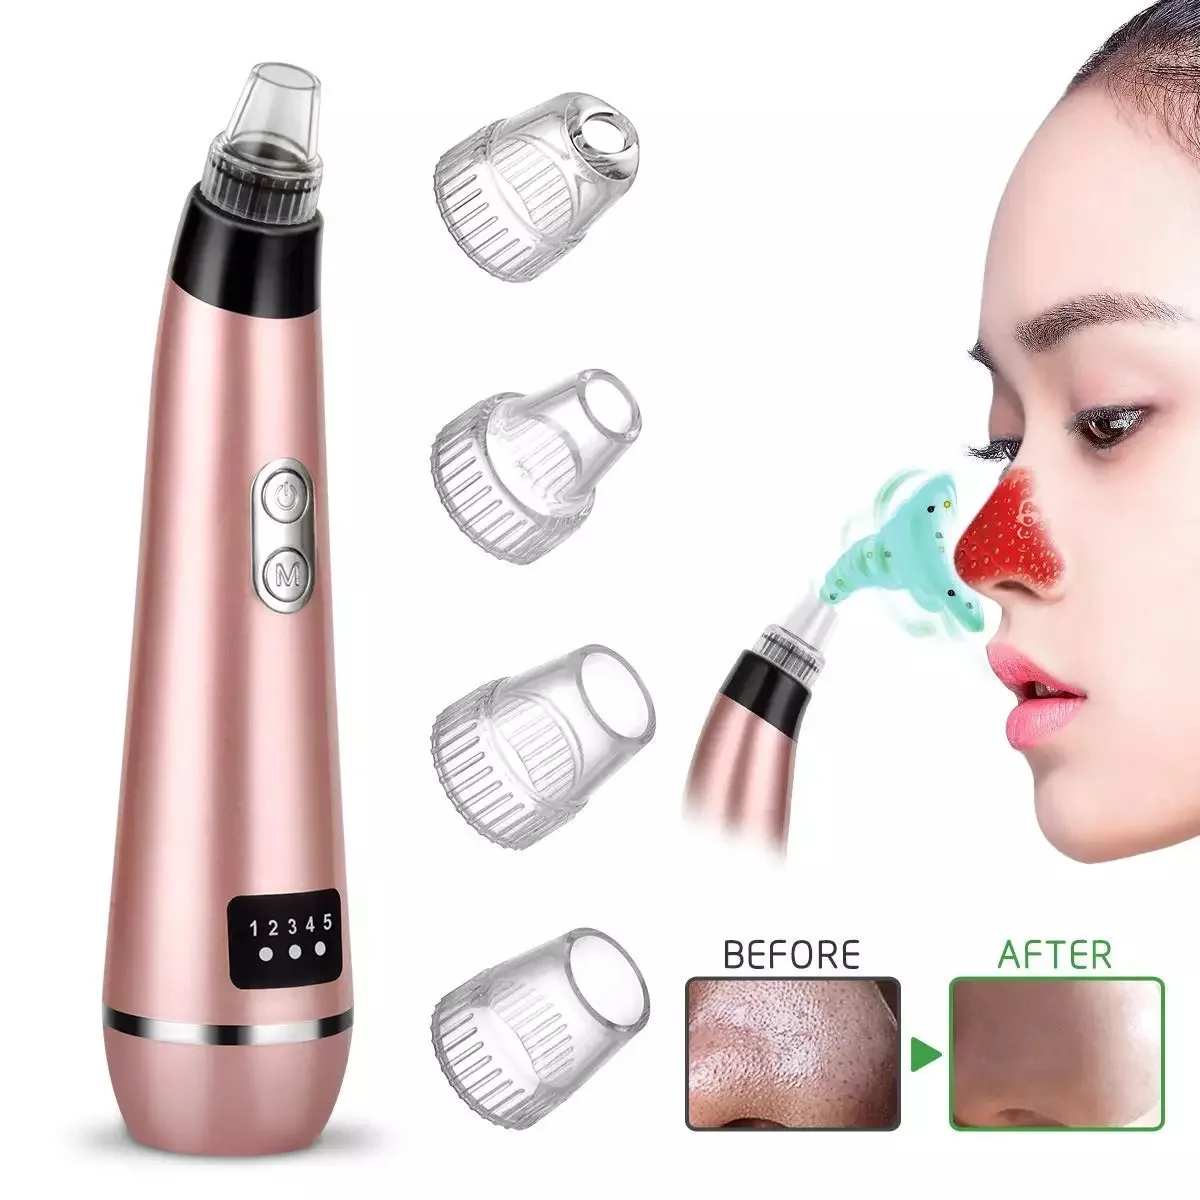 

m2 2020 vacuum suction pore cleaner blackhead nose black head remover deep strips vaccum face whitehead peel acne removal device